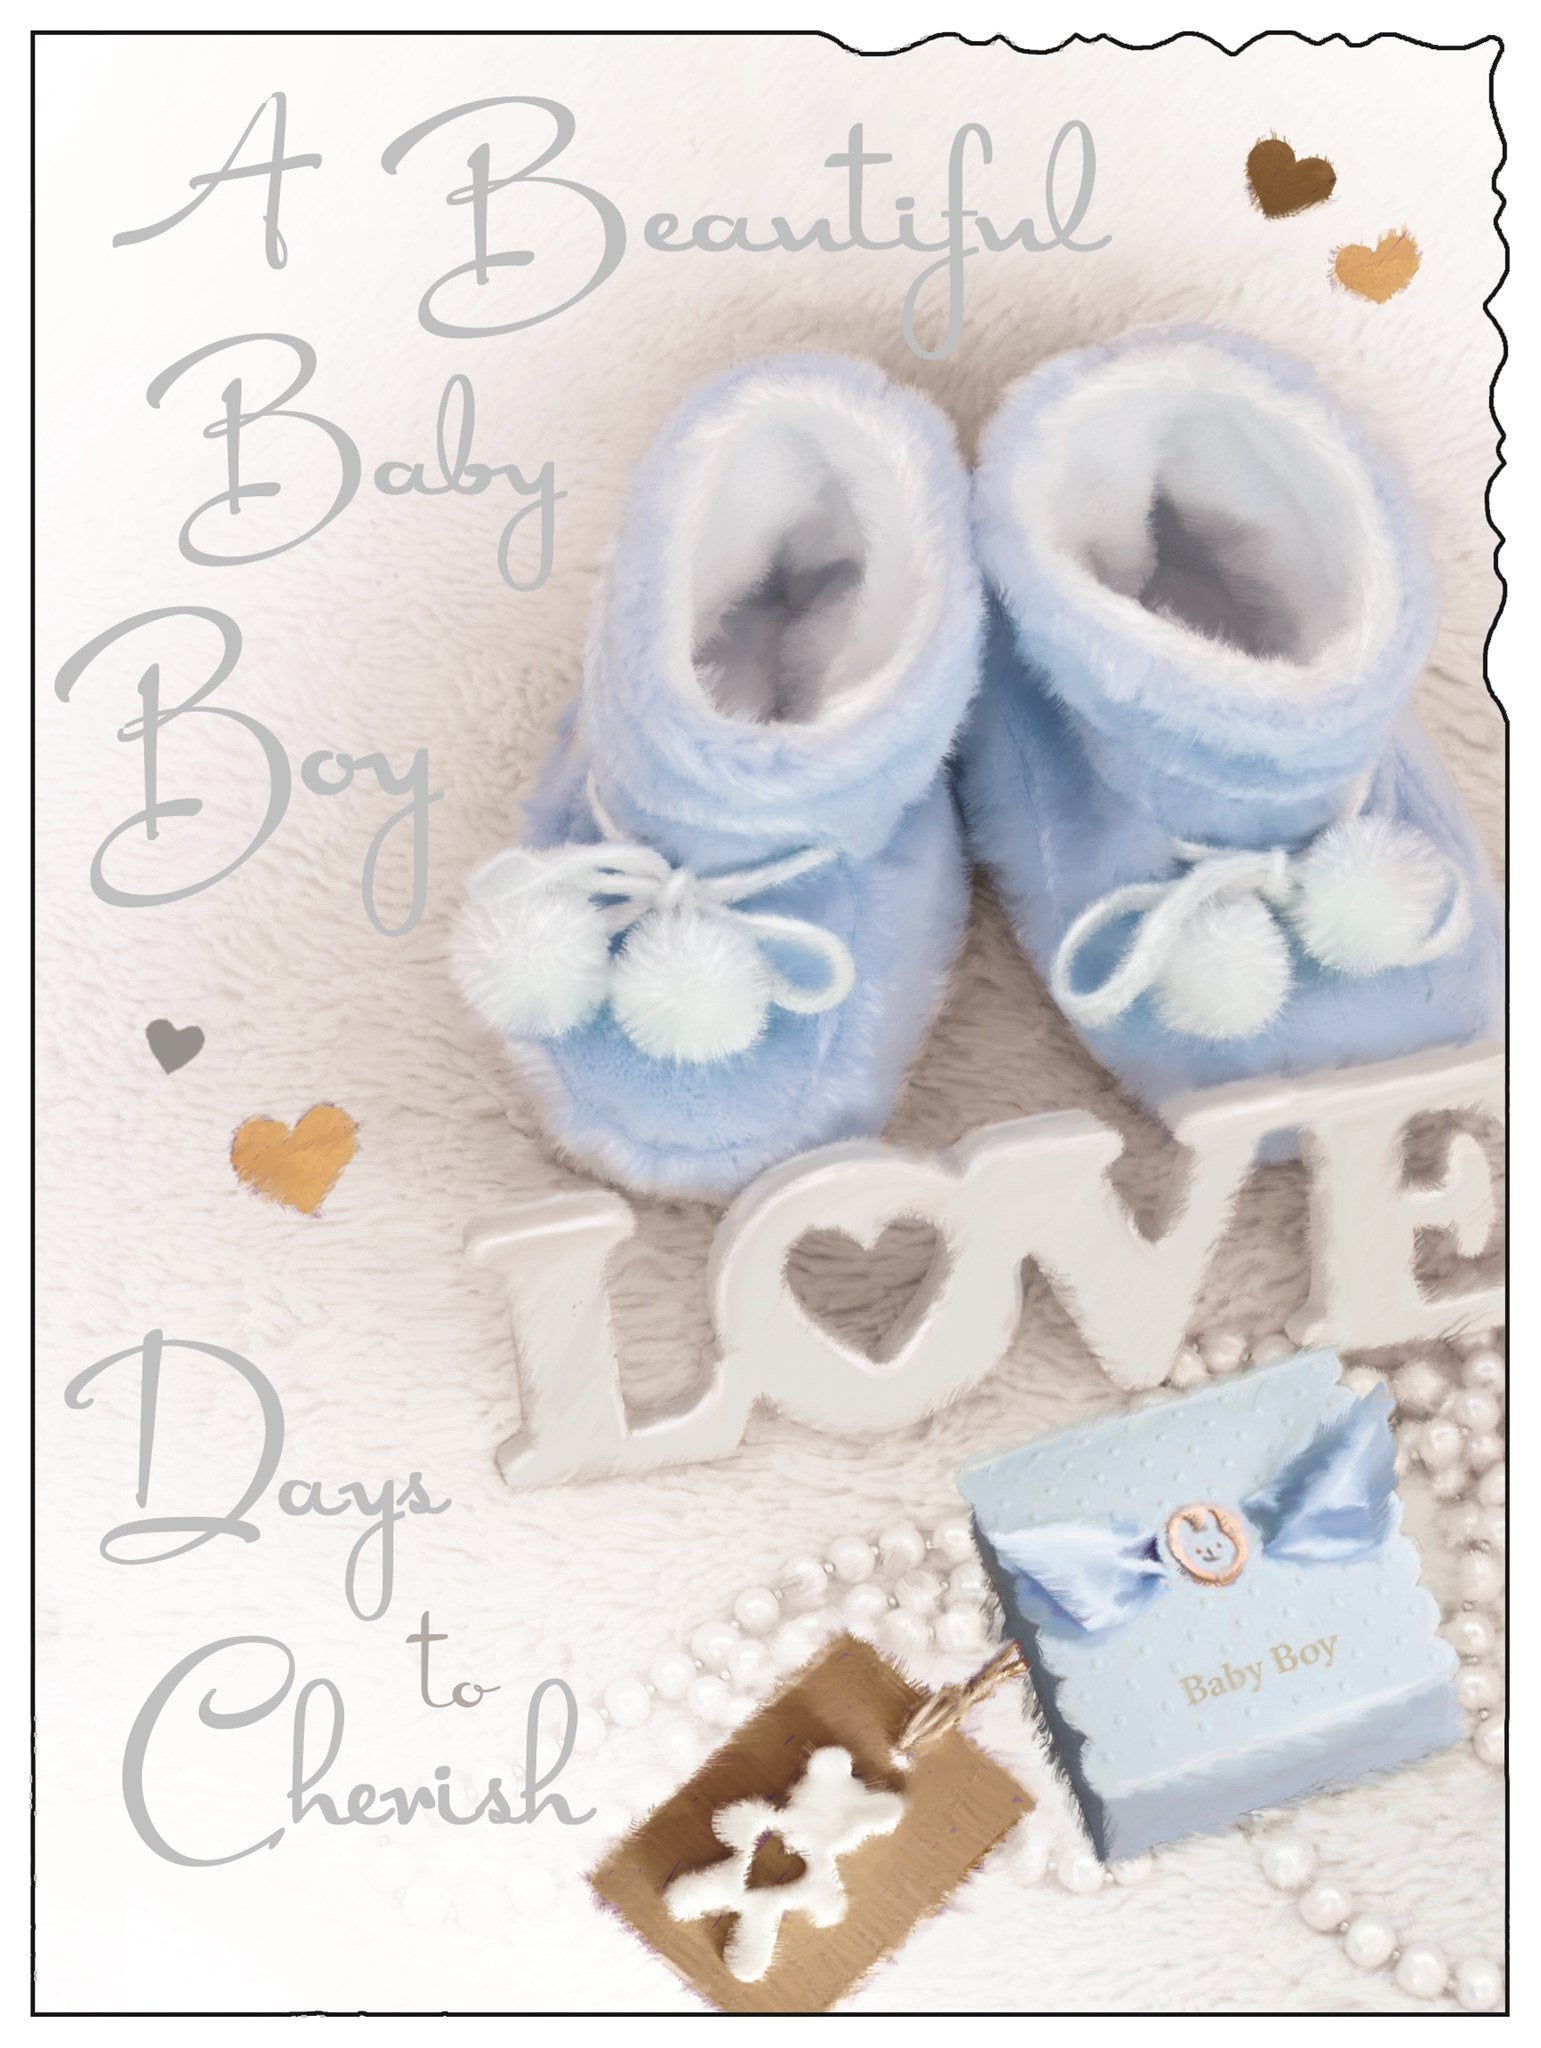 Front of New Baby Boy Cherish Greetings Card